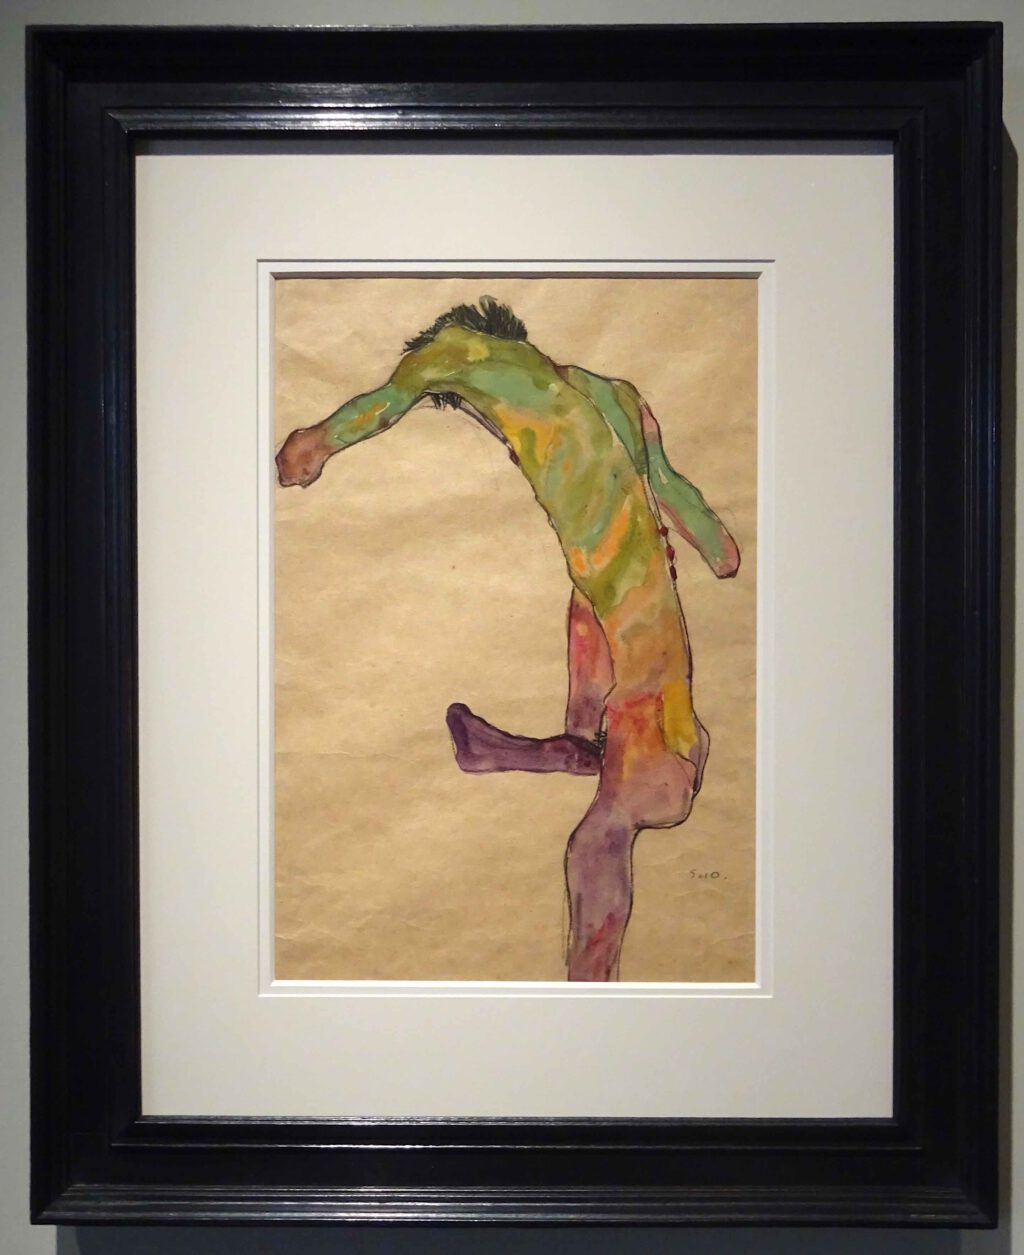 Egon Schiele Male Nude with Raised Leg, back view 1910, Watercolour and pencil on paper